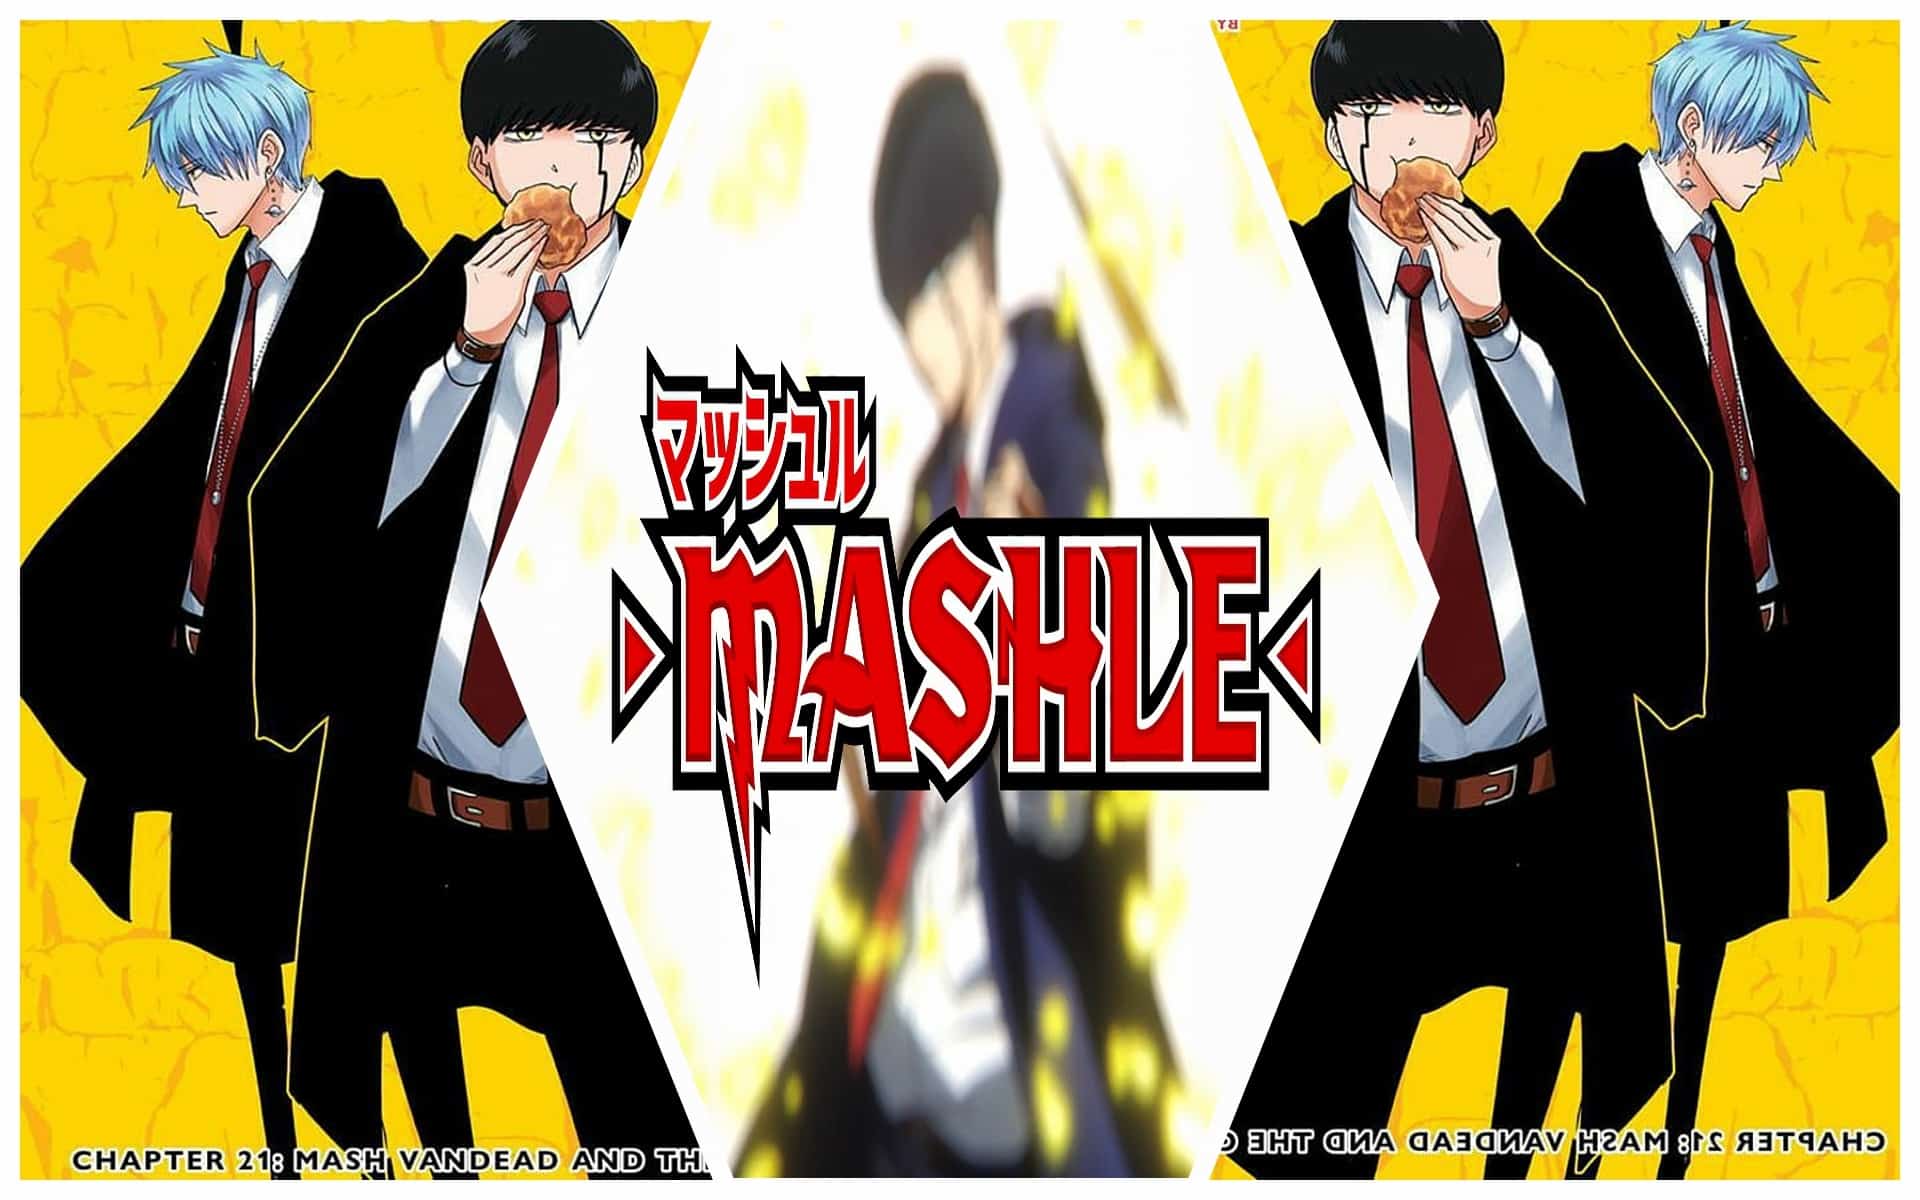 Mashle: Magic and Muscles Episode 2 Release Date & Time